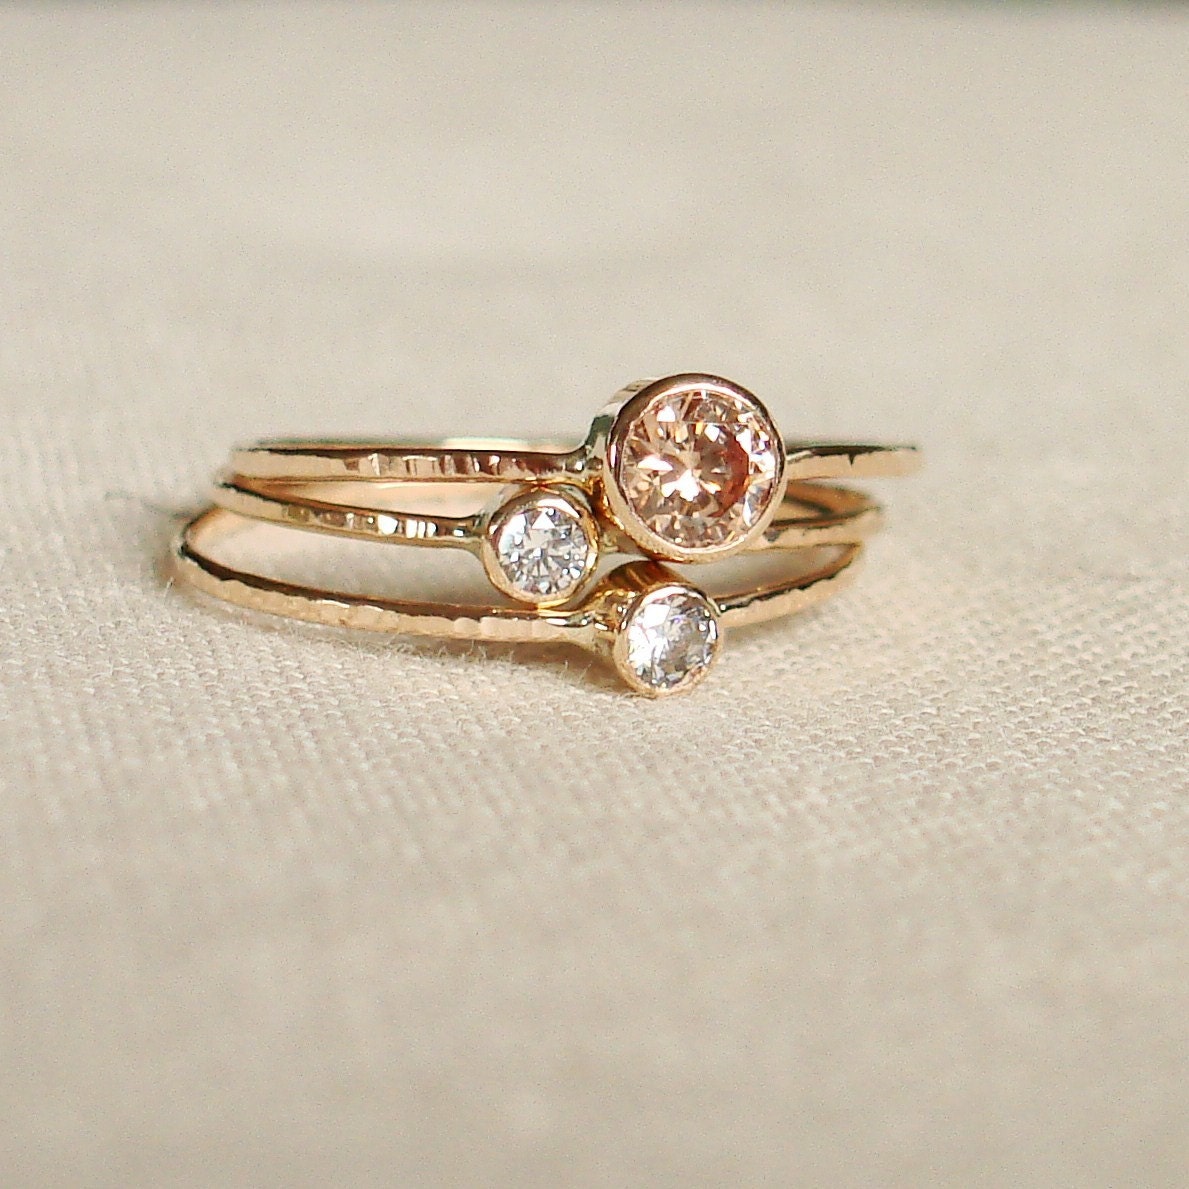 BACKORDERED - Sparkling Threads of Gold - Set of Three Tiny Stack Rings with 14k Gold Set Faceted Stones - Delicate